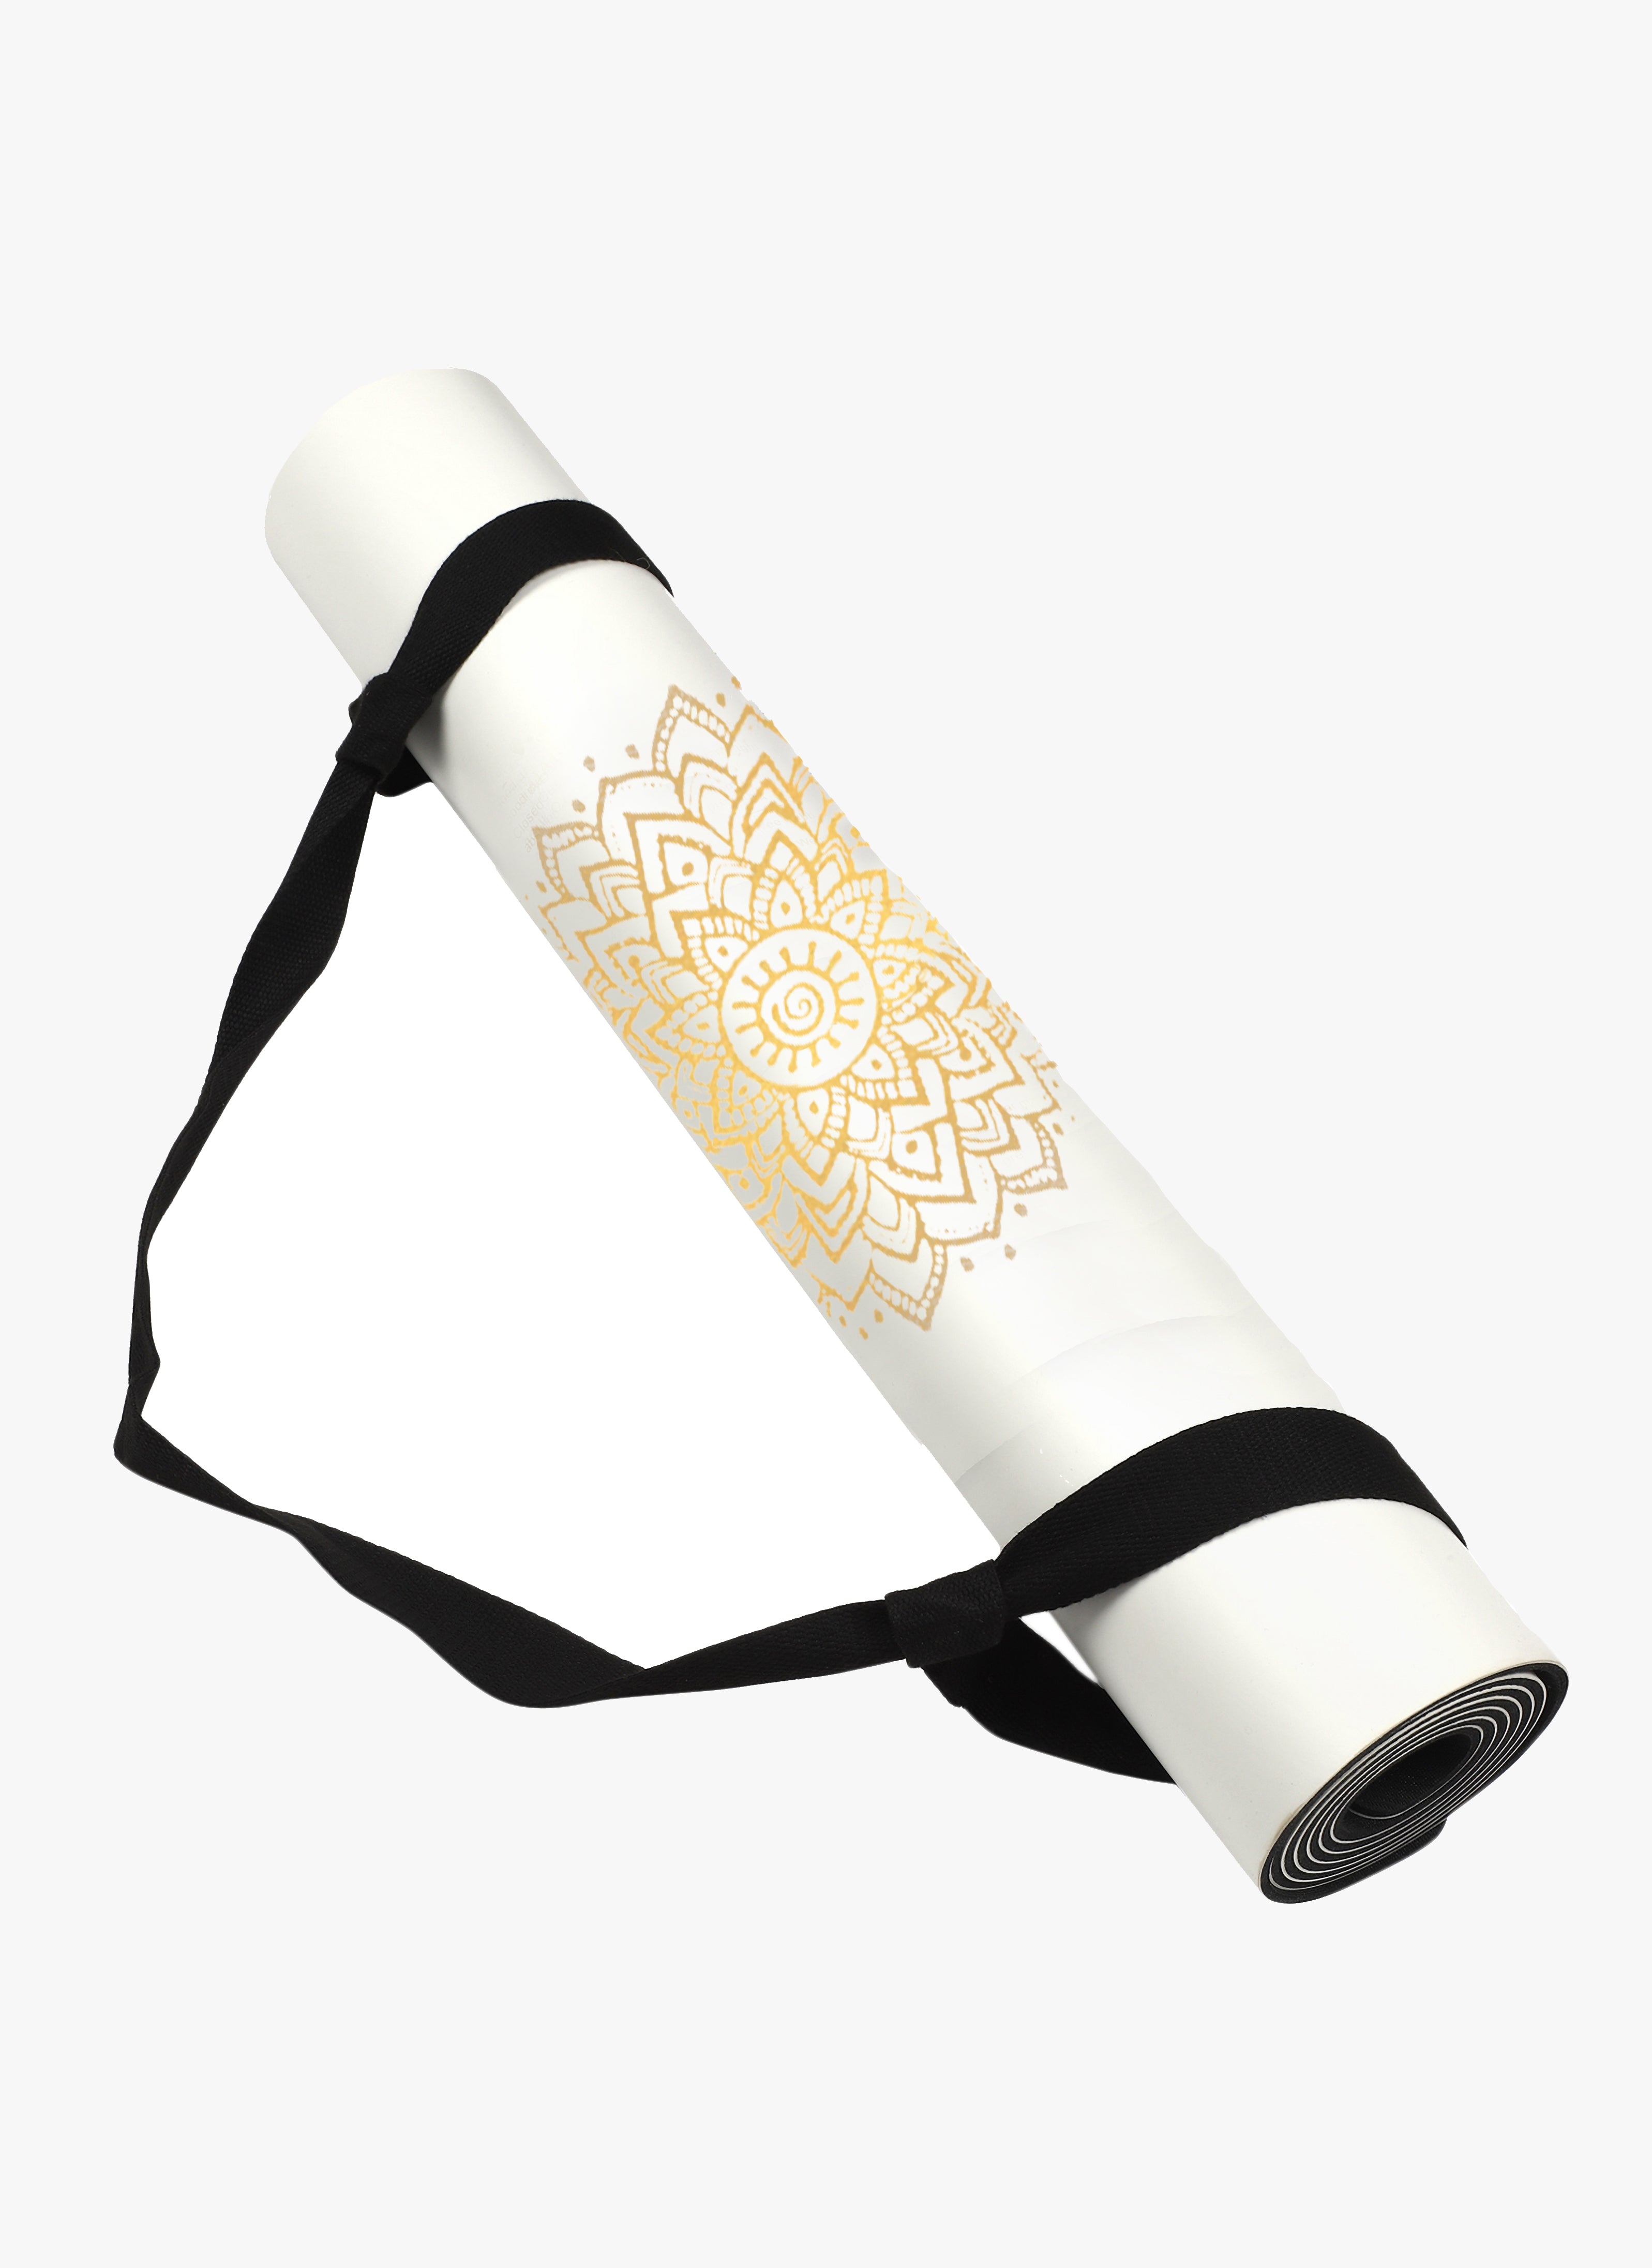 Flow Yoga Wear > CORK MATS & MORE < Moon Alignment Organic Jute Yoga Mat  Official Online Shop - Limited Time Free Shipping - Flow Yoga Wear Sales 